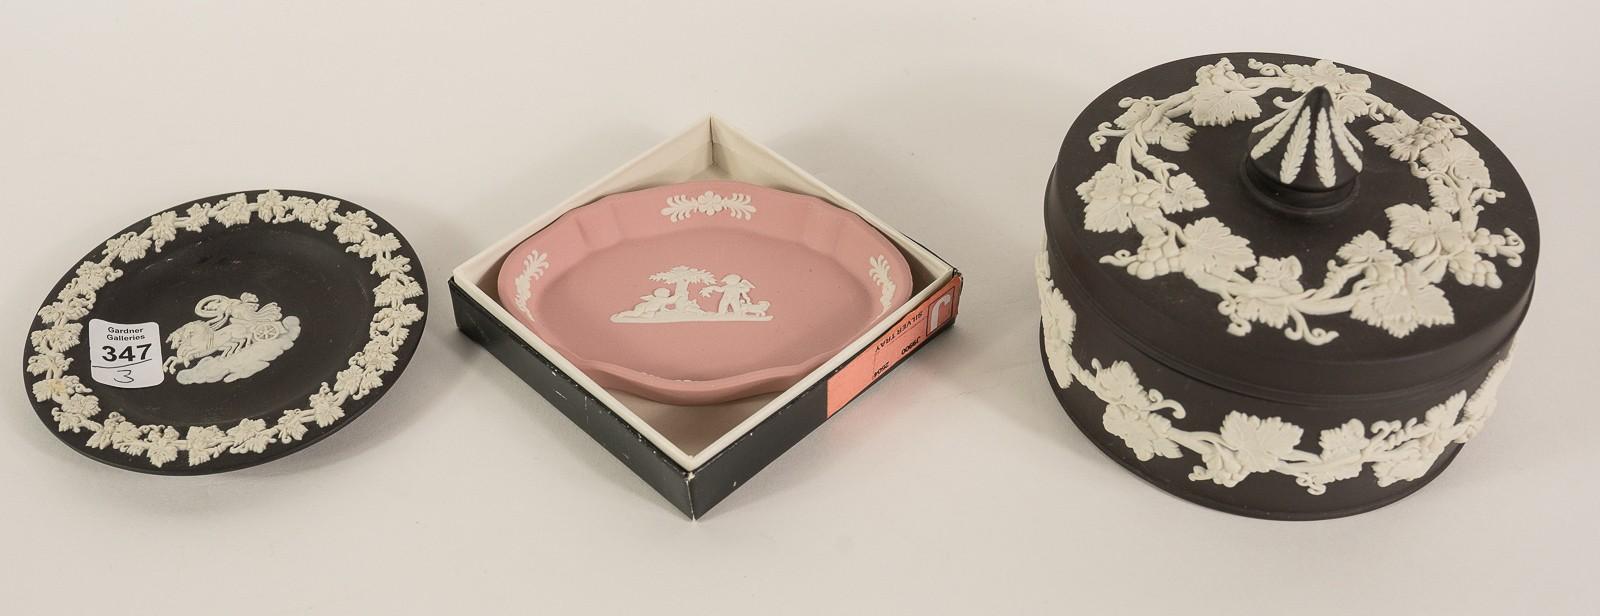 THREE PIECES OF WEDGWOOD